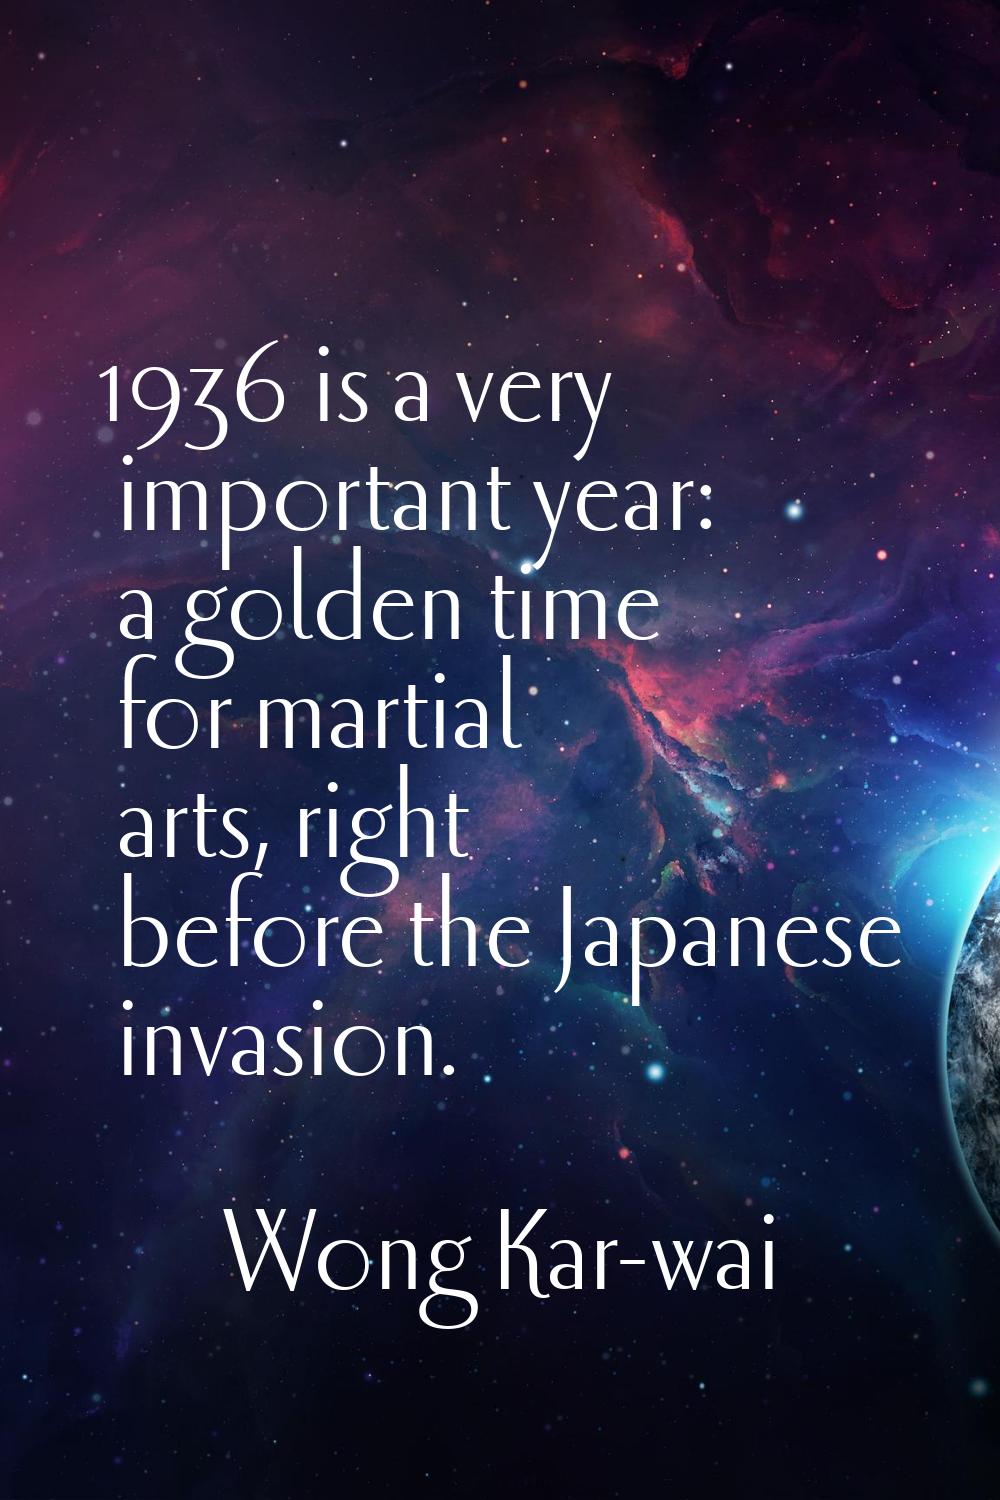 1936 is a very important year: a golden time for martial arts, right before the Japanese invasion.